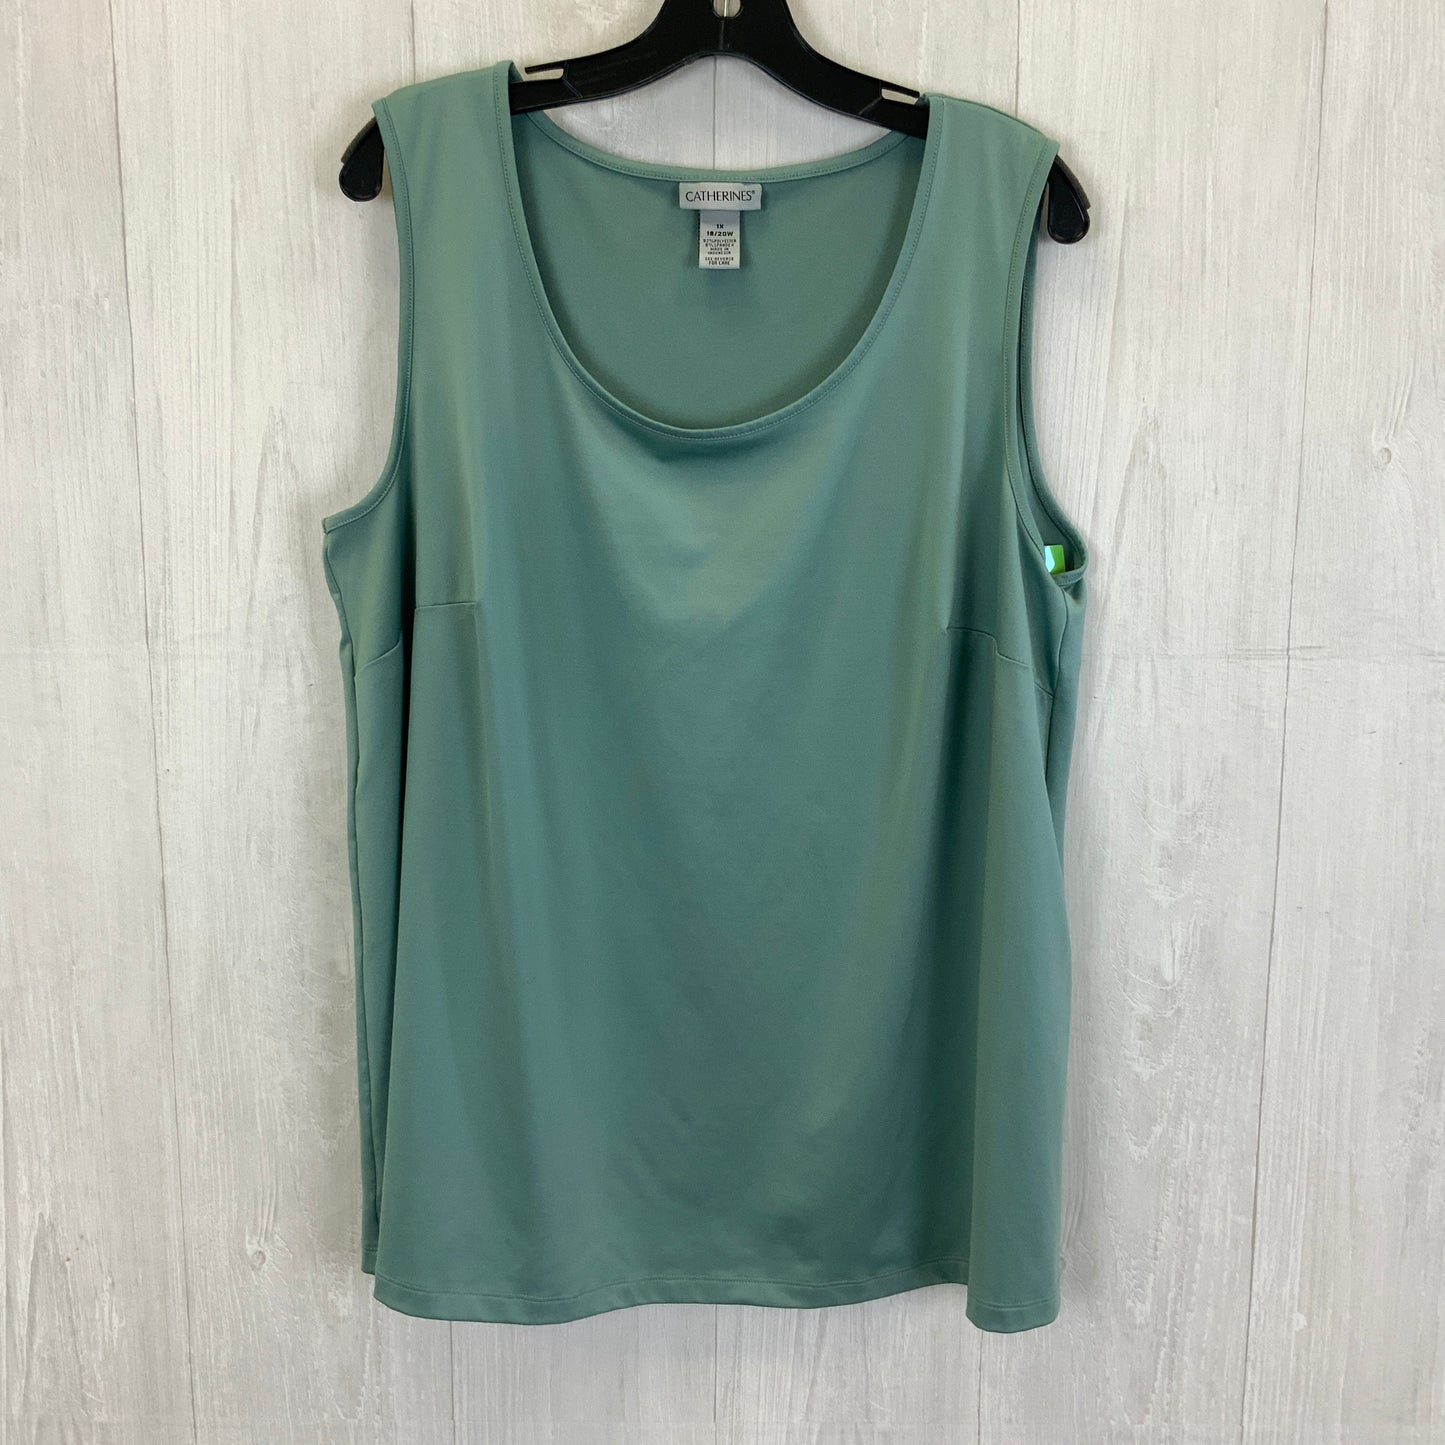 Green Tank Top Catherines, Size 1x